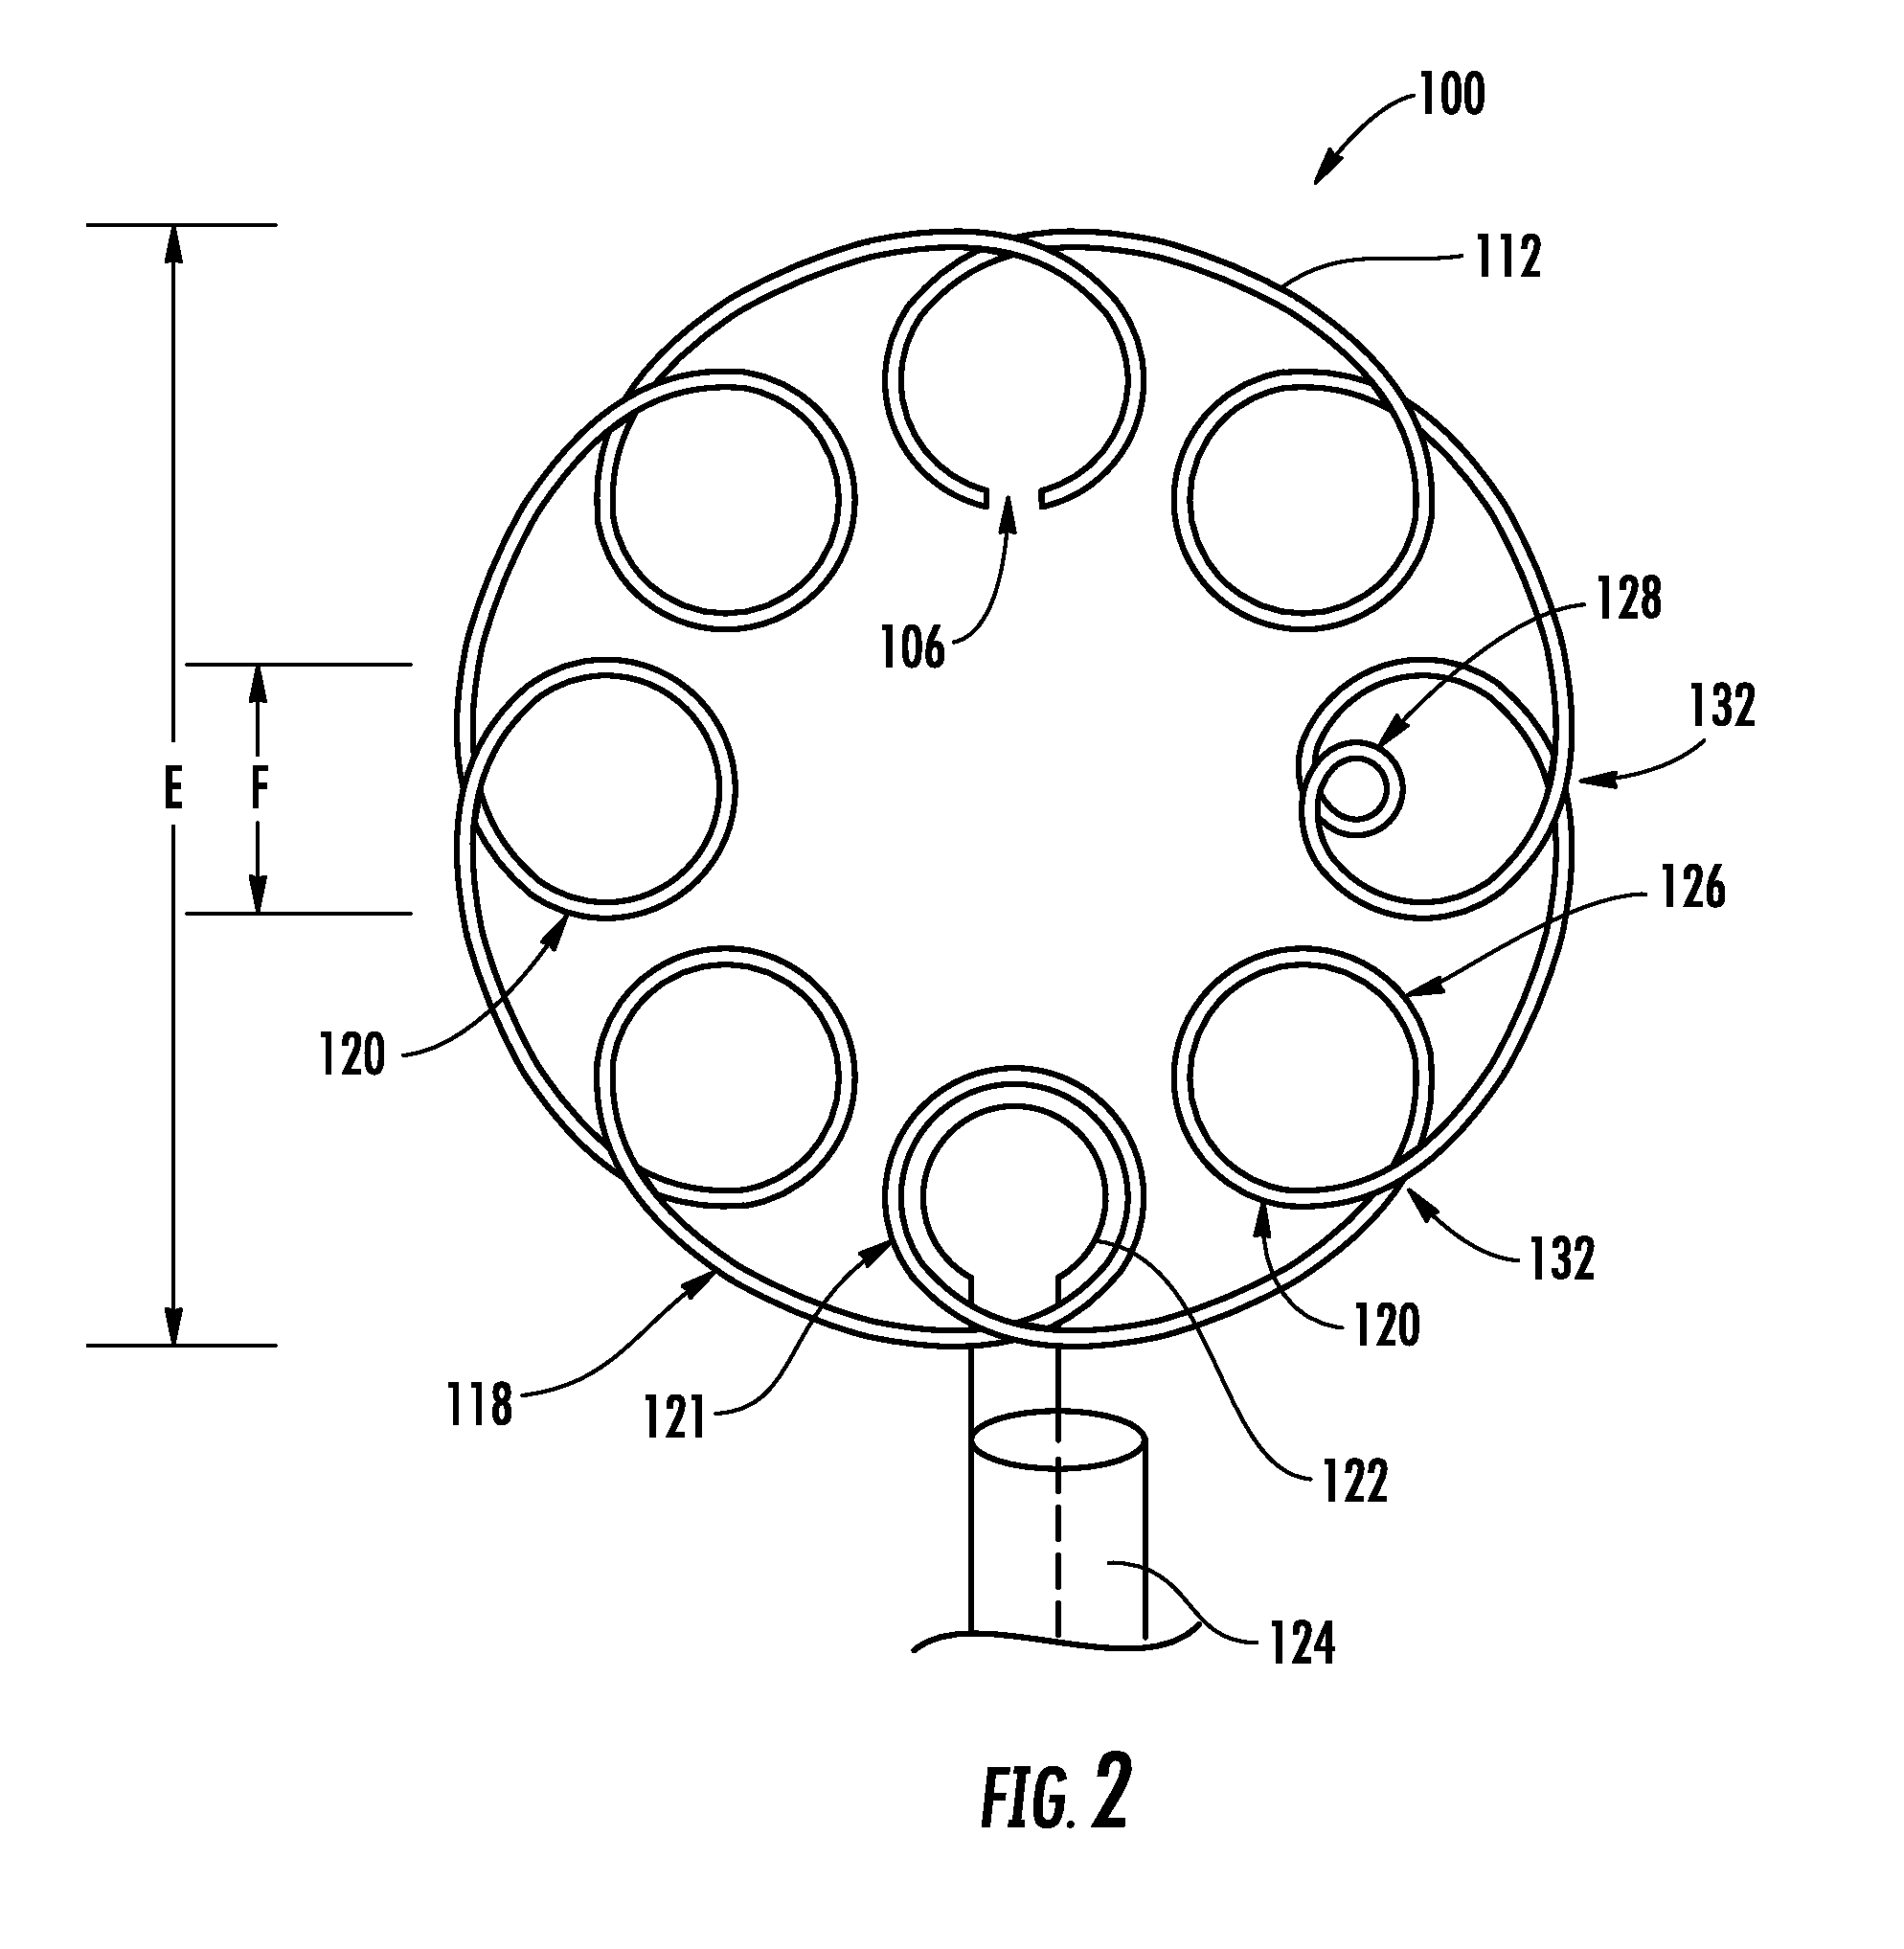 Planar communications antenna having an epicyclic structure and isotropic radiation, and associated methods